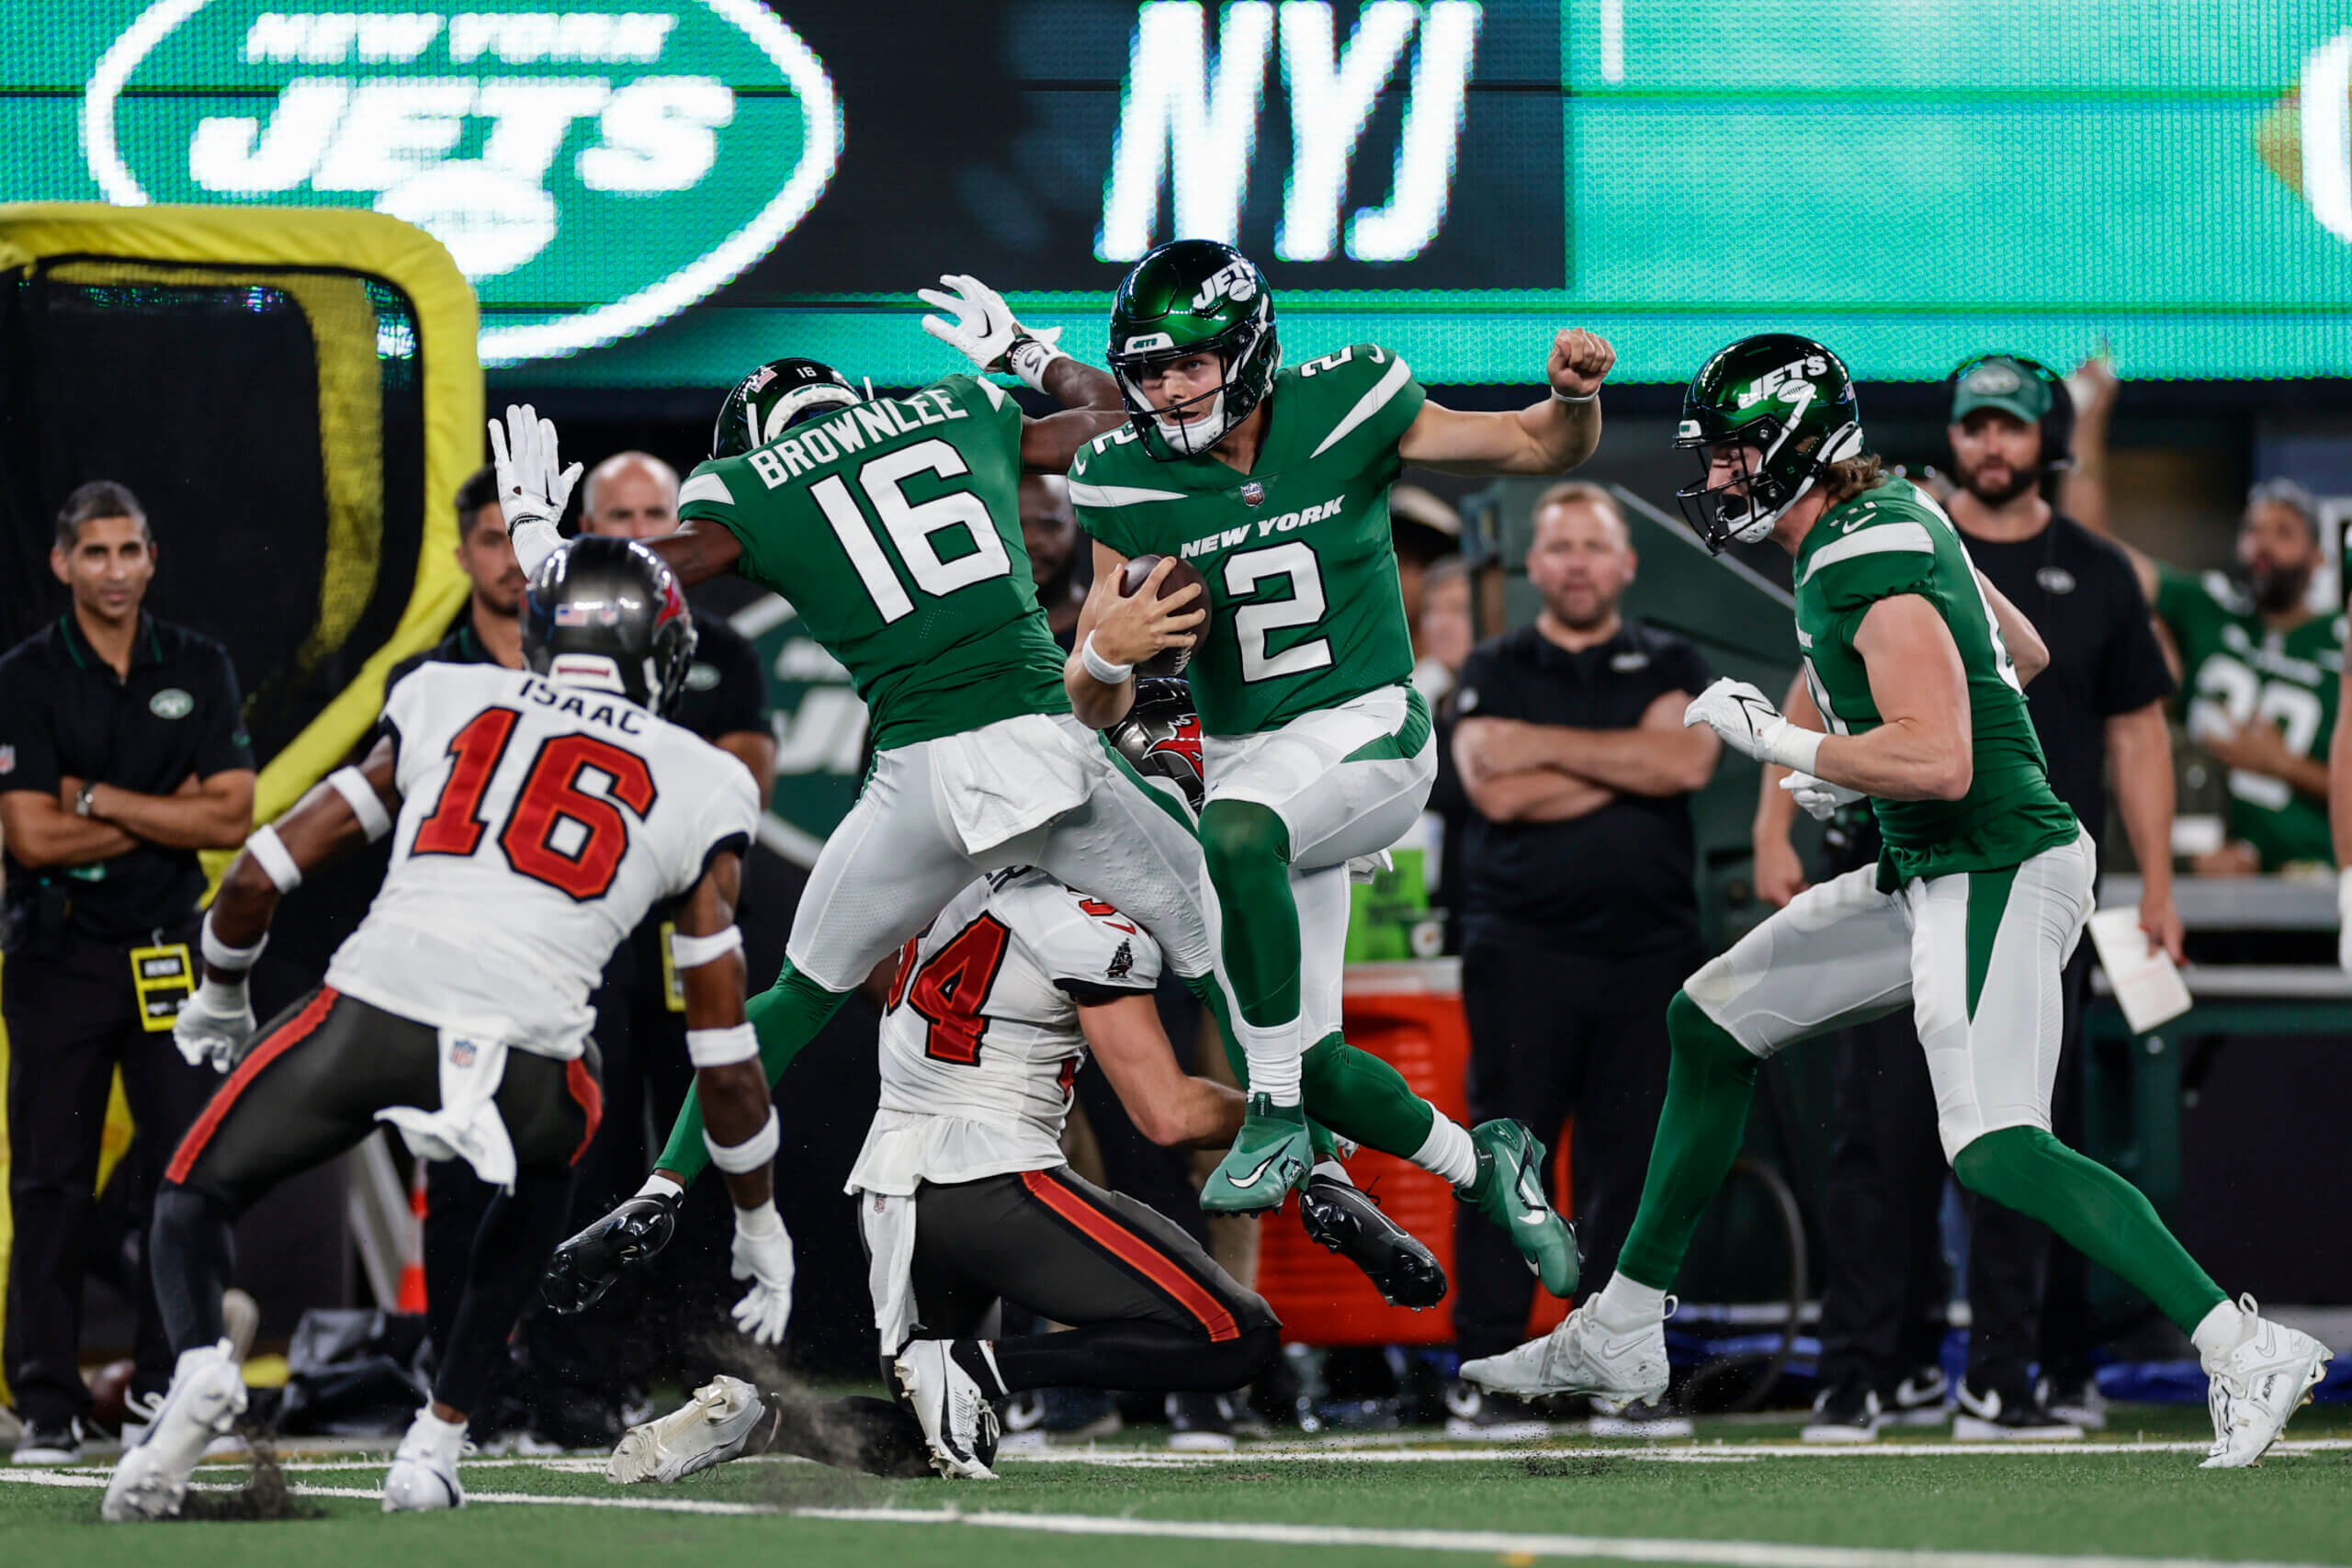 4 takeaways from Jets' preseason victory over Falcons